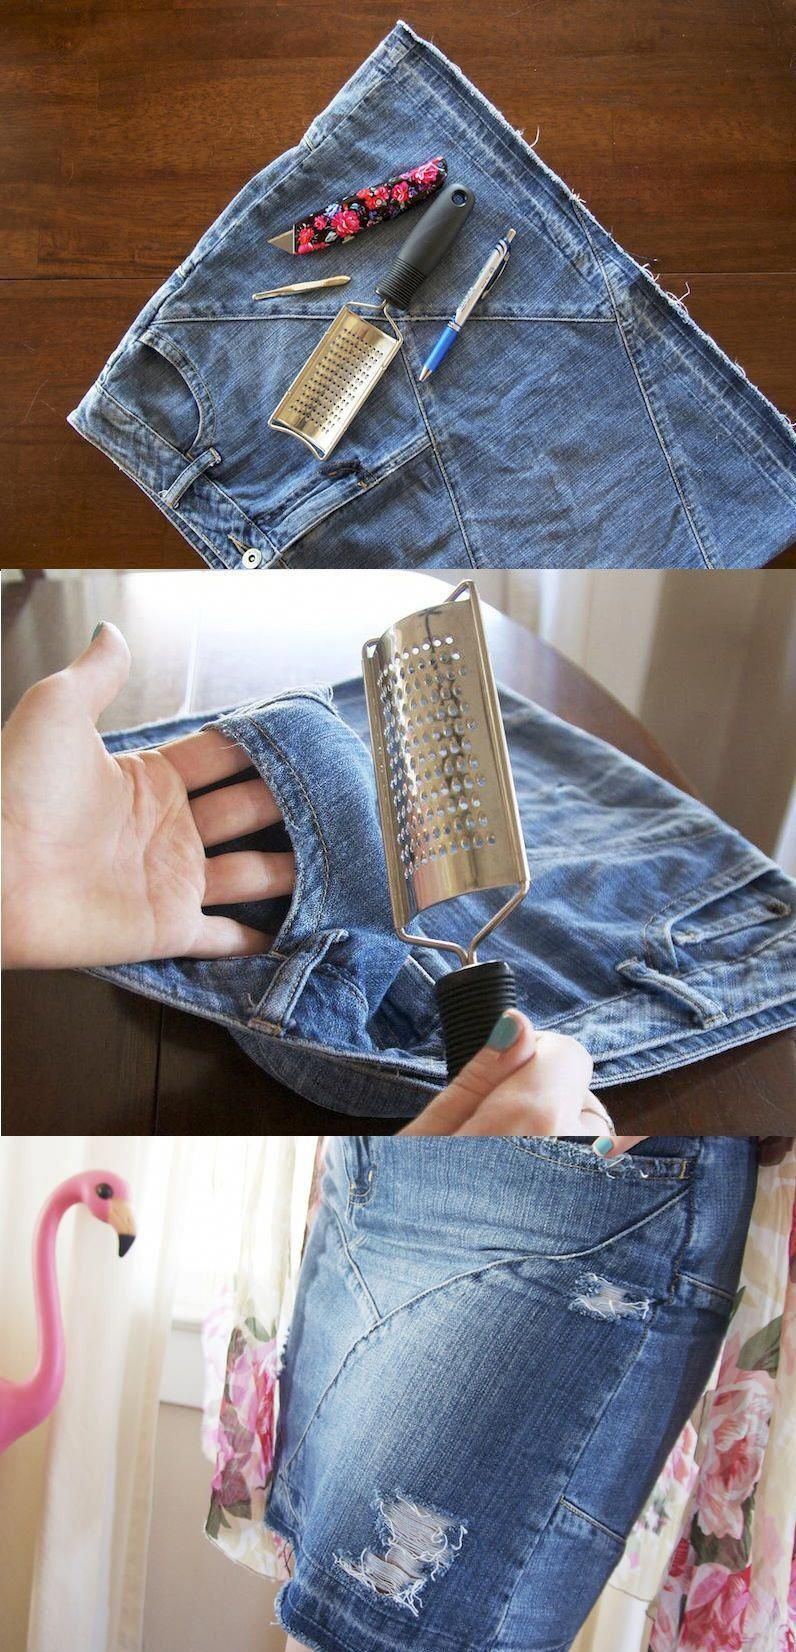 How To Shred Jeans